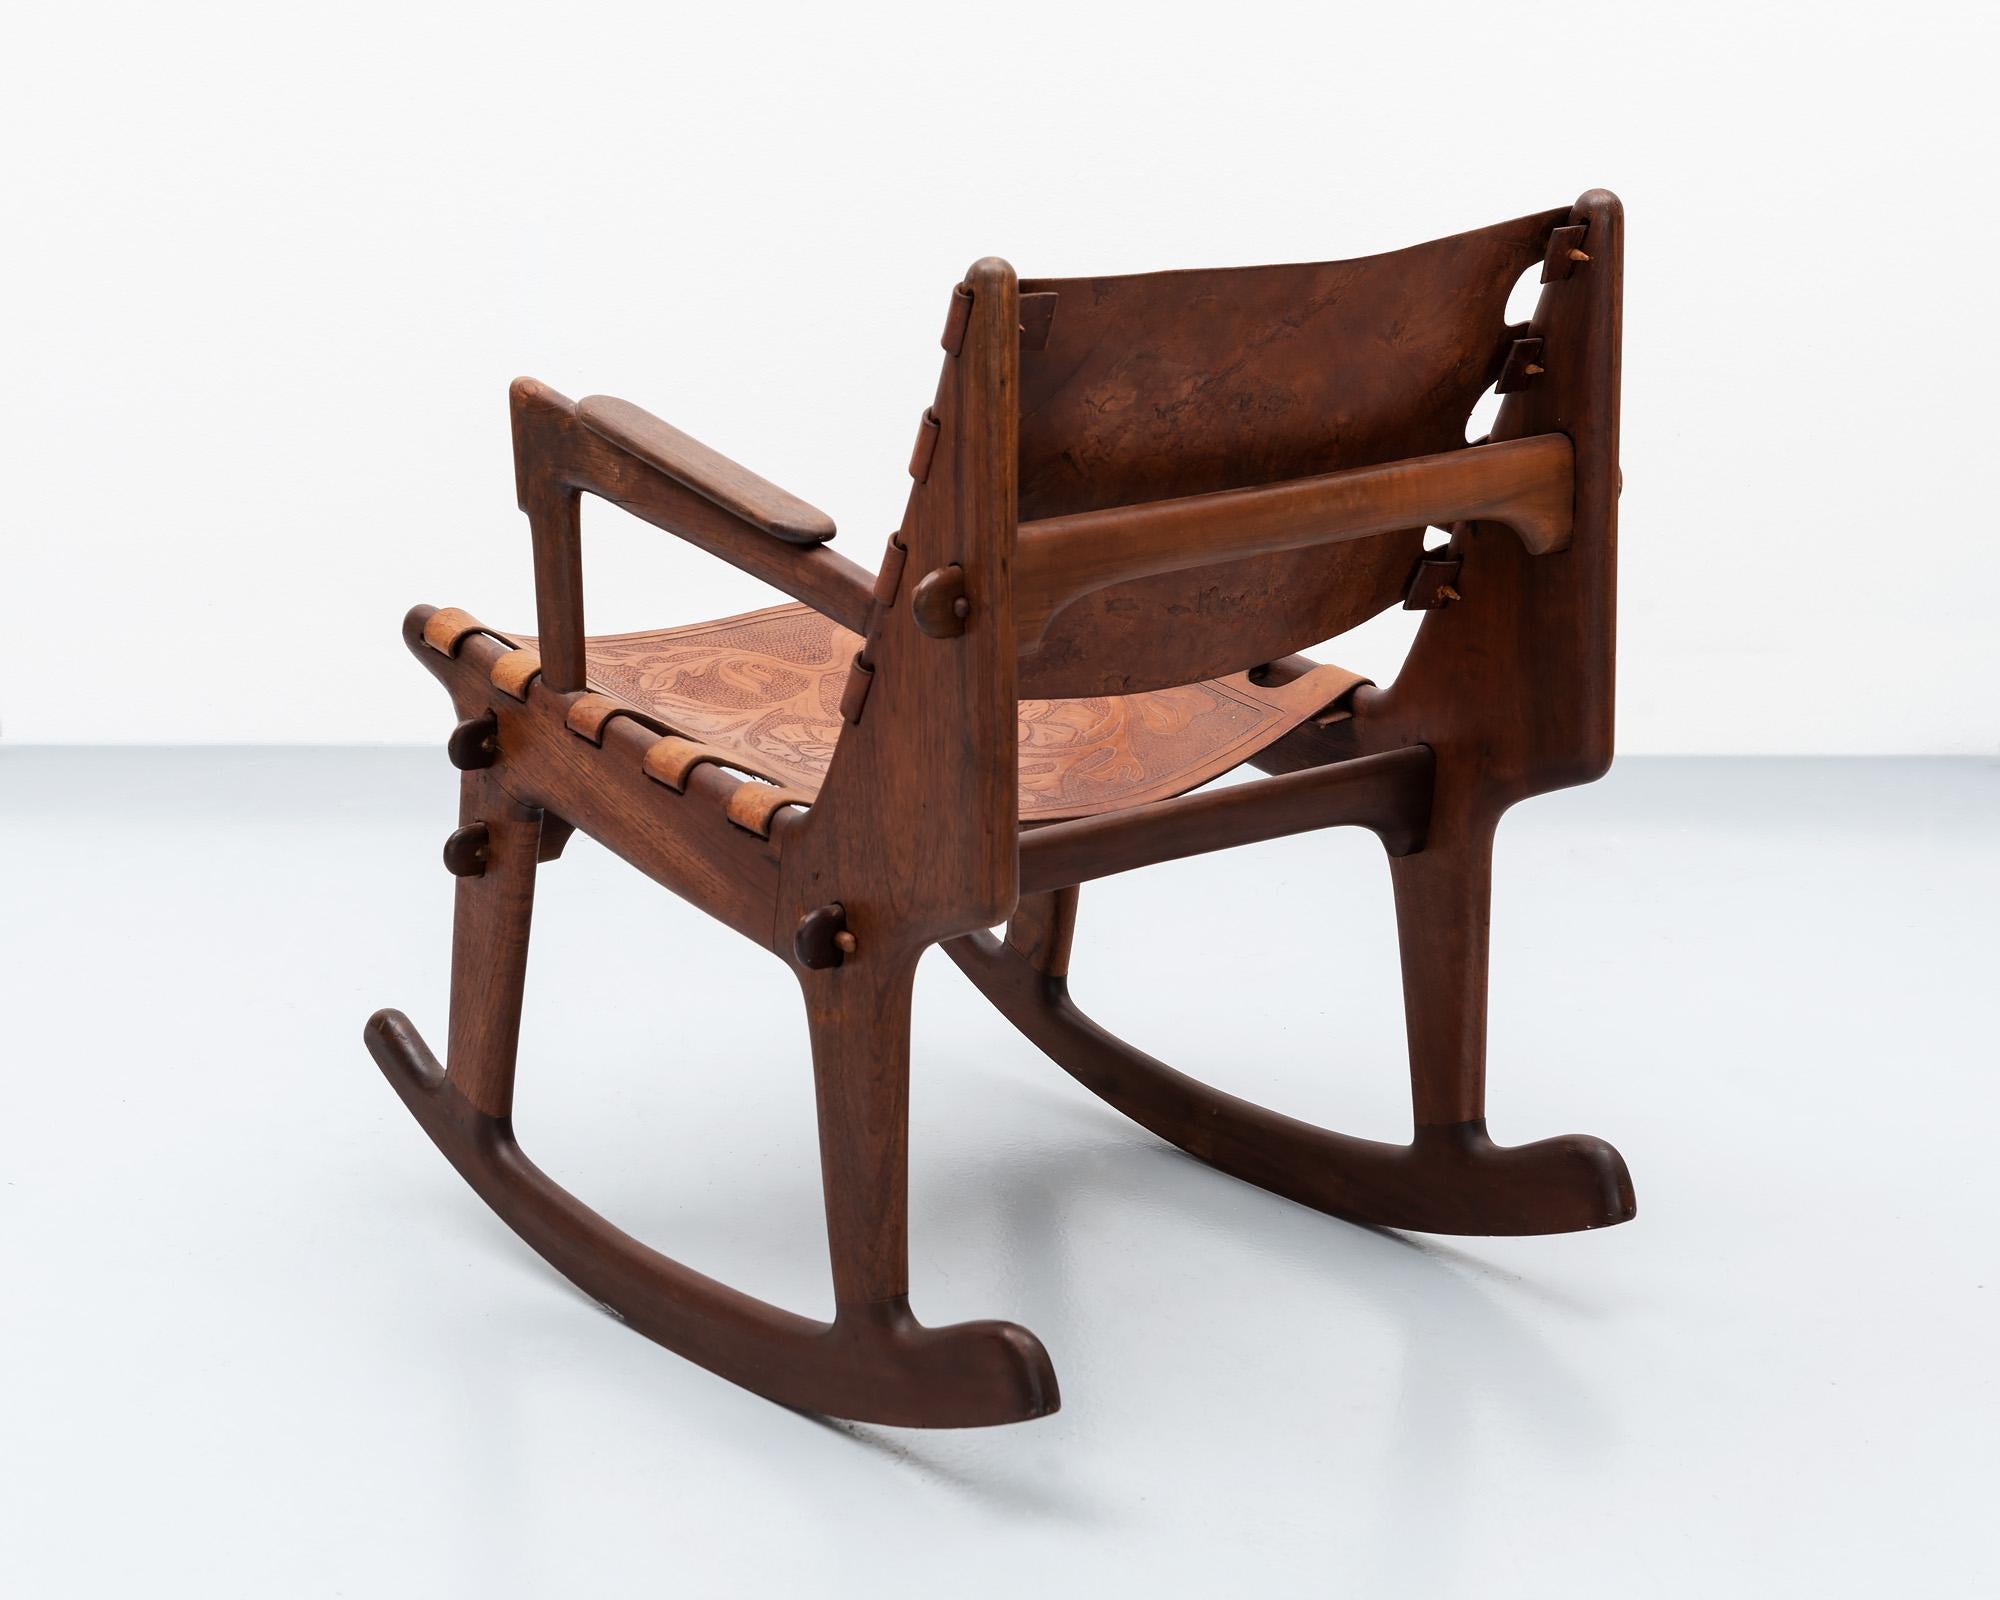 A rocking chair by South American modernist Angel Pazmino for Muebles de Estilo in solid rosewood with heavy, hand-tooled leather seat and back. Classic Pazmino peg joinery and Scandinavian Modern influences characterize this rocker. Ecuador, 1960s